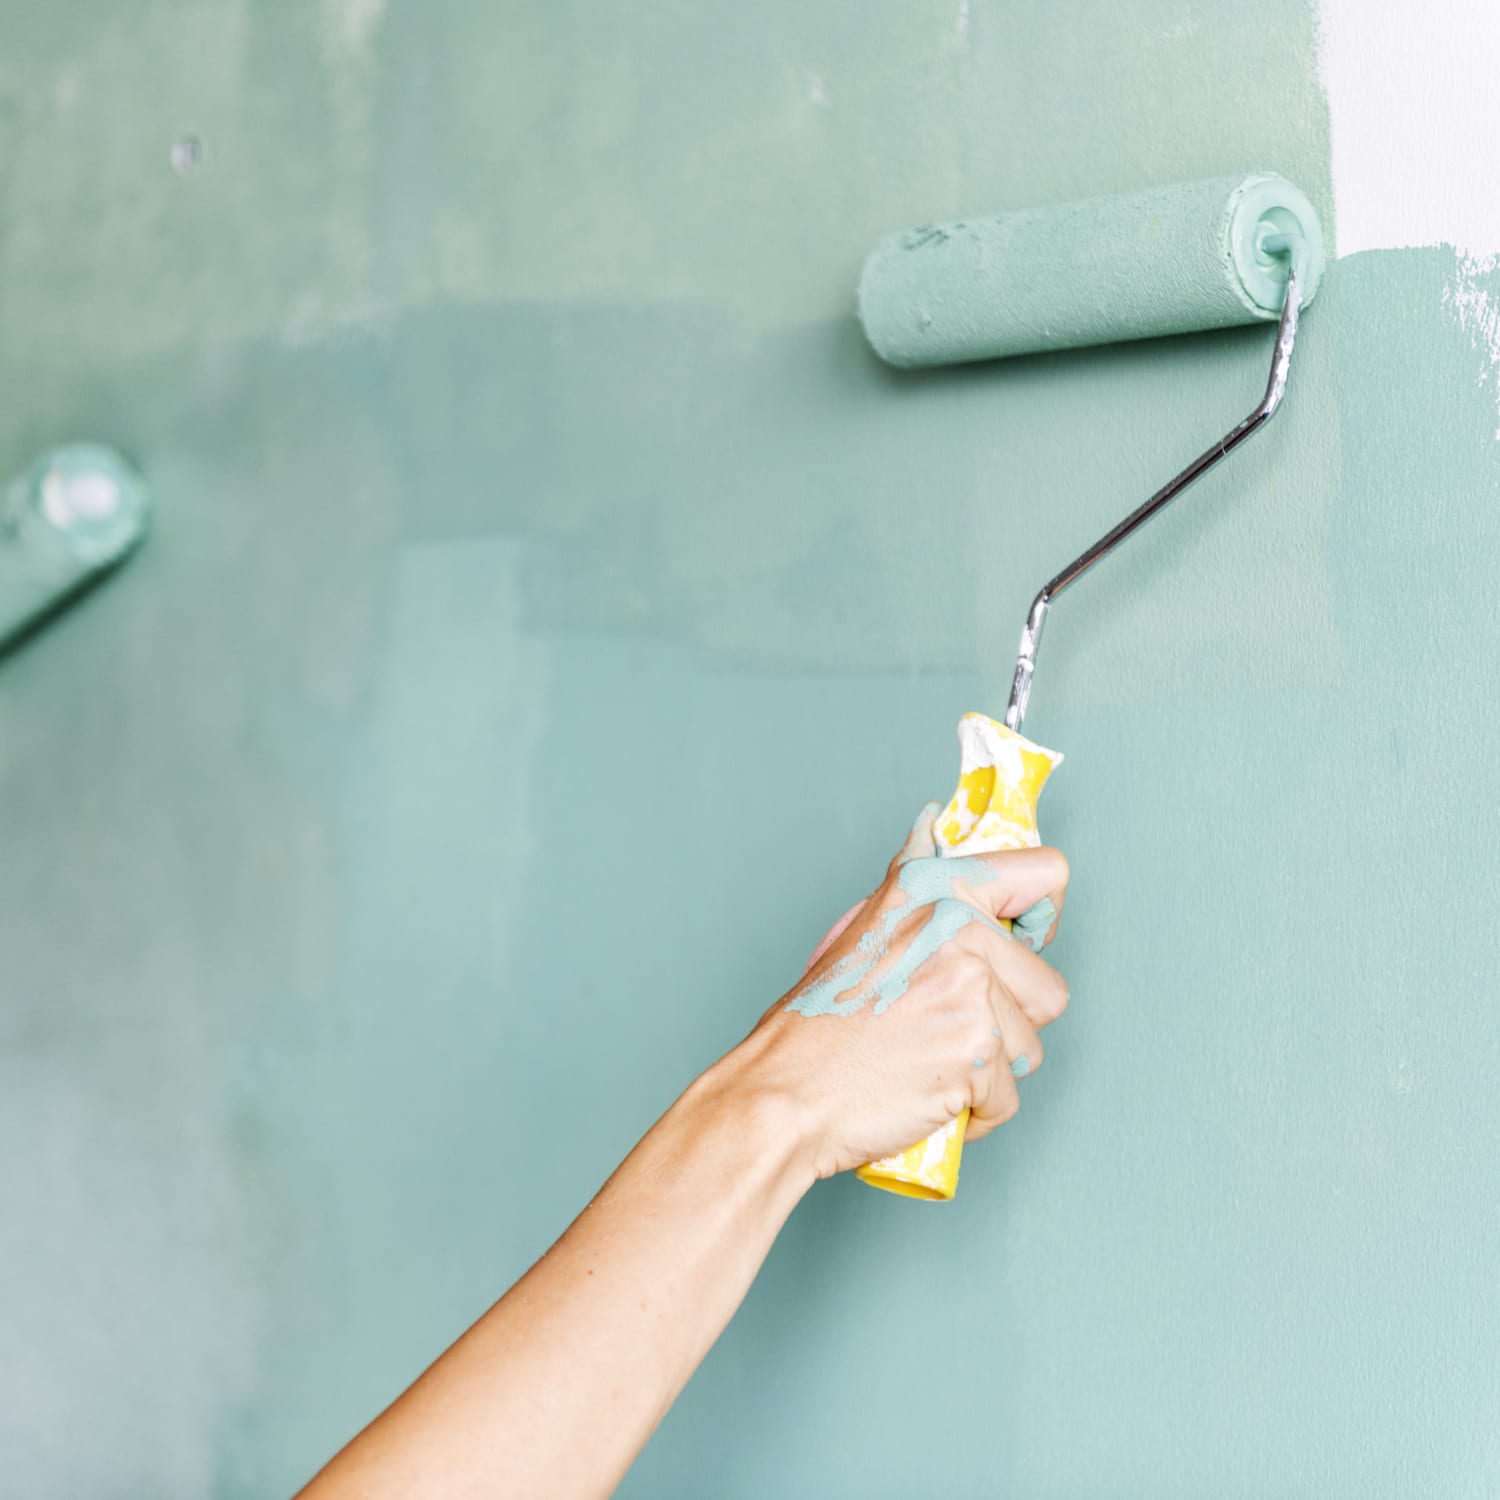 30 Reasons Your Paint Job Looks Amateur (and How to Fix It